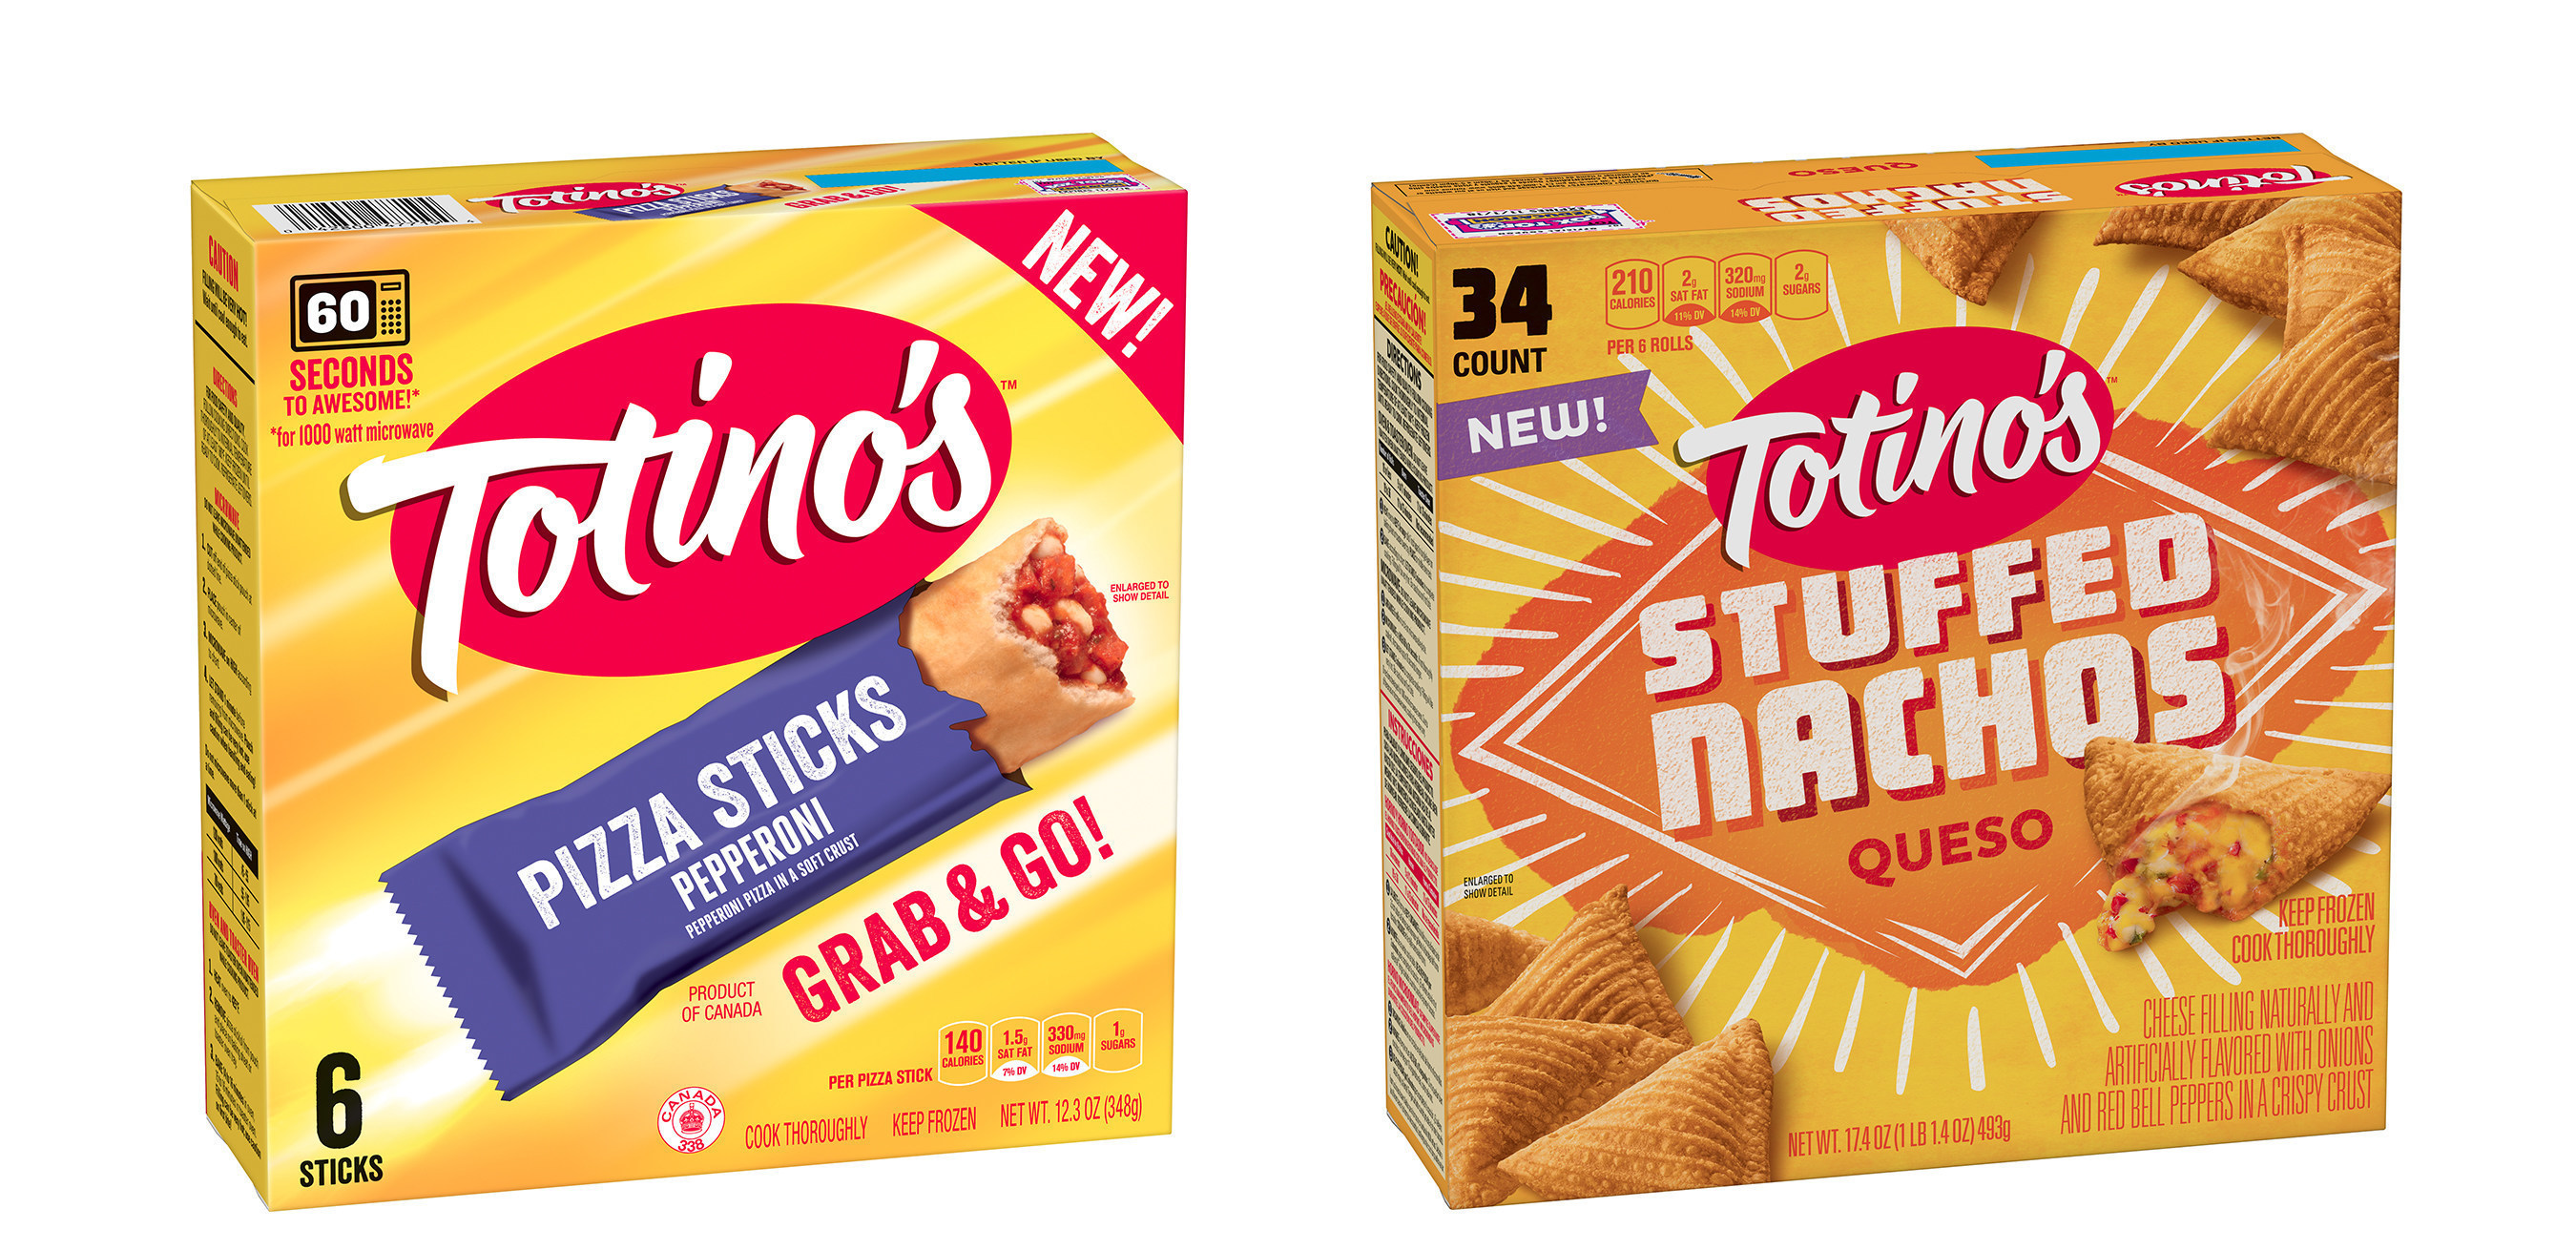 Totino's(TM) debuts two new products, Stuffed Nachos and Pizza Sticks, giving millennials more convenient snack options that fit into their busy, on-the-go lifestyles.